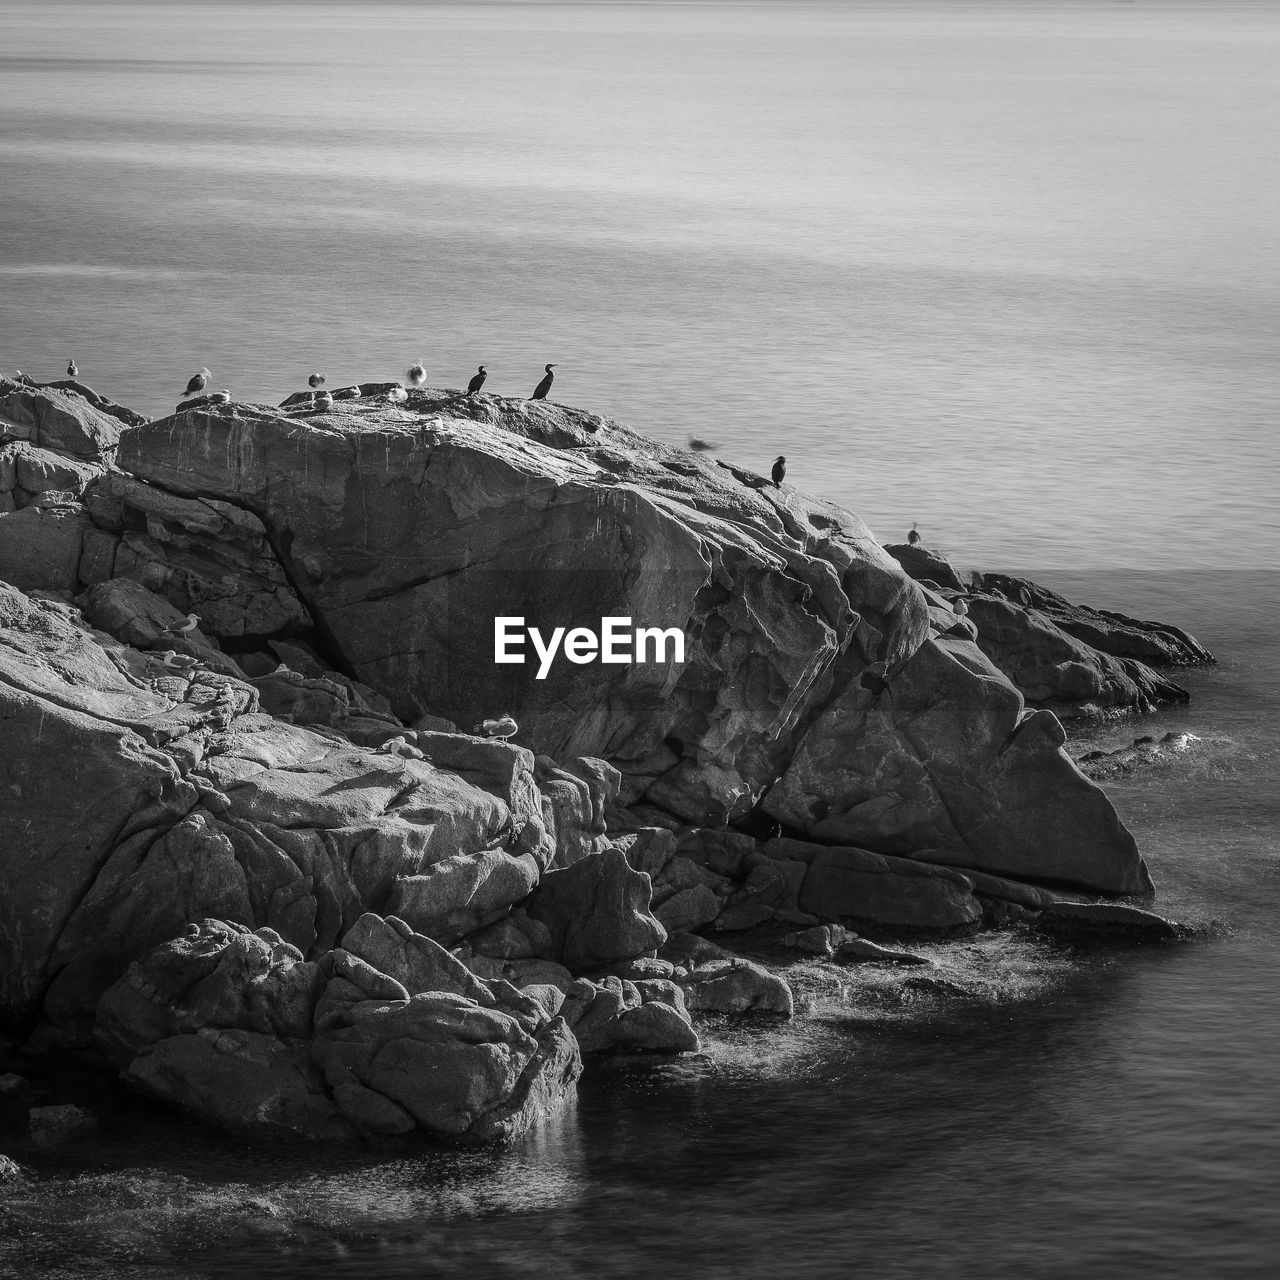 water, sea, black and white, rock, coast, nature, vehicle, monochrome, monochrome photography, wave, ocean, beauty in nature, scenics - nature, beach, land, tranquility, tranquil scene, day, no people, shore, terrain, rock formation, outdoors, non-urban scene, sky, horizon over water, nautical vessel, animal, wildlife, animal themes